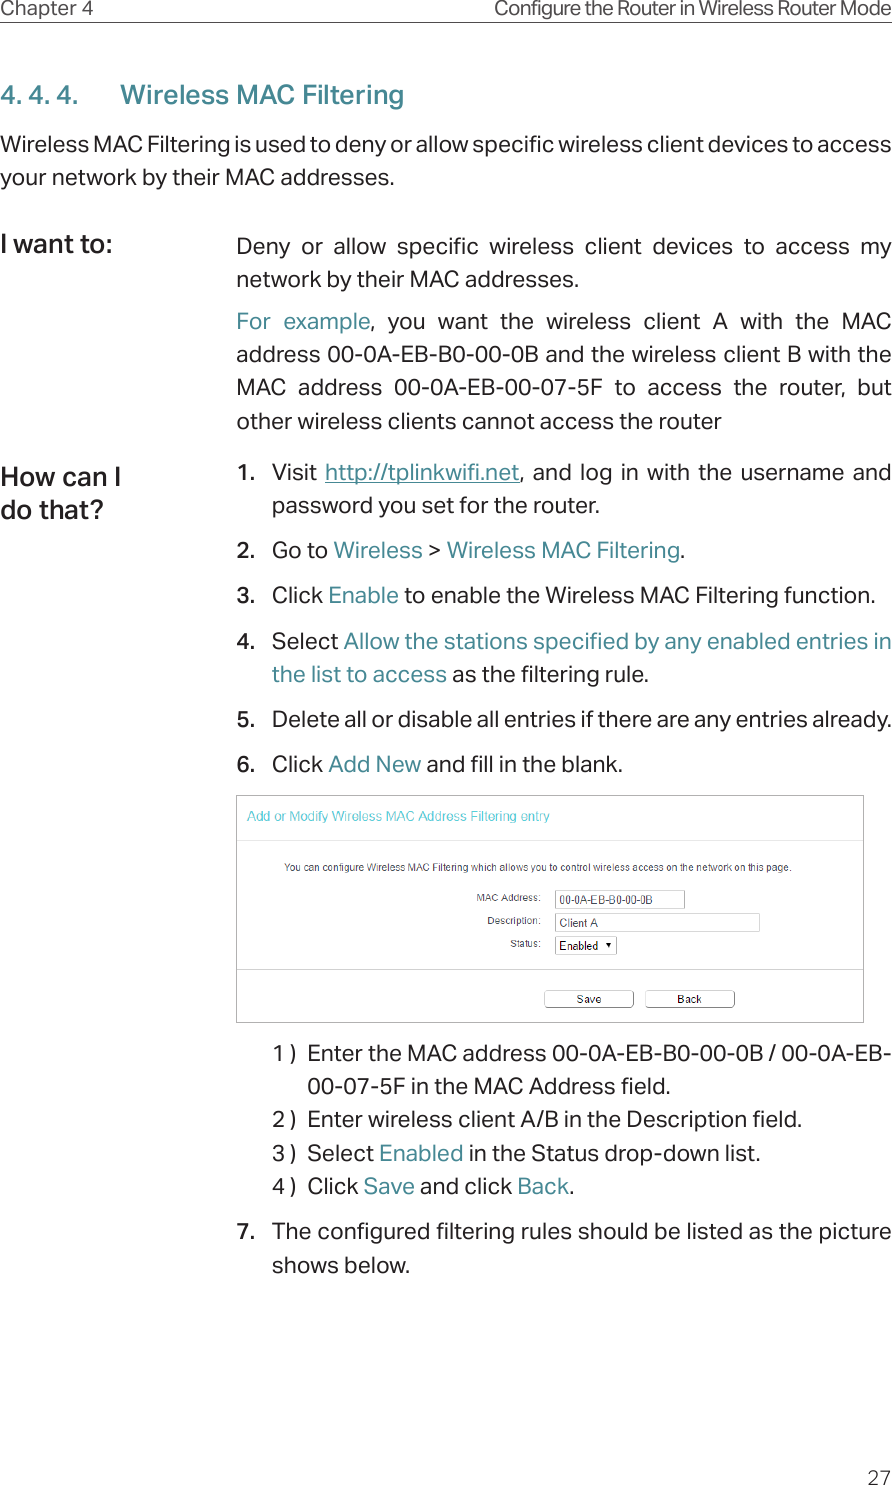 27Chapter 4 Configure the Router in Wireless Router Mode4. 4. 4.  Wireless MAC FilteringWireless MAC Filtering is used to deny or allow specific wireless client devices to access your network by their MAC addresses.Deny or allow specific wireless client devices to access my network by their MAC addresses.For example, you want the wireless client A with the MAC address 00-0A-EB-B0-00-0B and the wireless client B with the MAC address 00-0A-EB-00-07-5F to access the router, but other wireless clients cannot access the router1.  Visit  http://tplinkwifi.net, and log in with the username and password you set for the router.2.  Go to Wireless &gt; Wireless MAC Filtering.3.  Click Enable to enable the Wireless MAC Filtering function.4.  Select Allow the stations specified by any enabled entries in the list to access as the filtering rule.5.  Delete all or disable all entries if there are any entries already.6.  Click Add New and fill in the blank.1 )  Enter the MAC address 00-0A-EB-B0-00-0B / 00-0A-EB-00-07-5F in the MAC Address field.2 )  Enter wireless client A/B in the Description field.3 )  Select Enabled in the Status drop-down list.4 )  Click Save and click Back.7.  The configured filtering rules should be listed as the picture shows below.I want to:How can I do that?